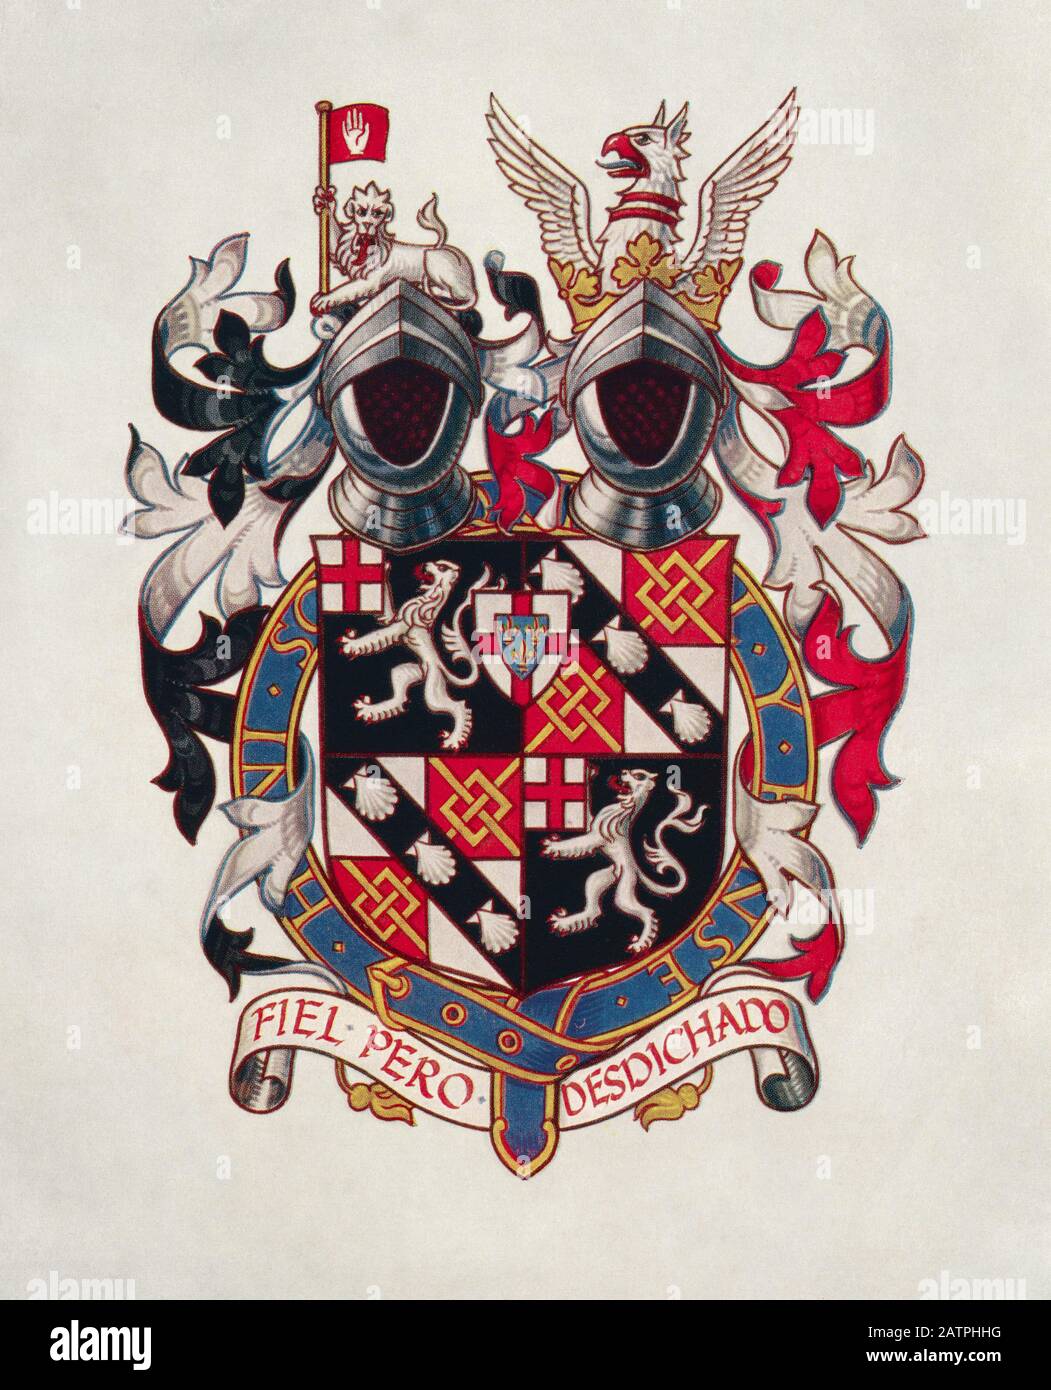 The Coat of Arms of Sir Winston Churchill.  Sir Winston Leonard Spencer-Churchill, 1874 – 1965. British politician, army officer, writer and twice Prime Minister of the United Kingdom. Stock Photo